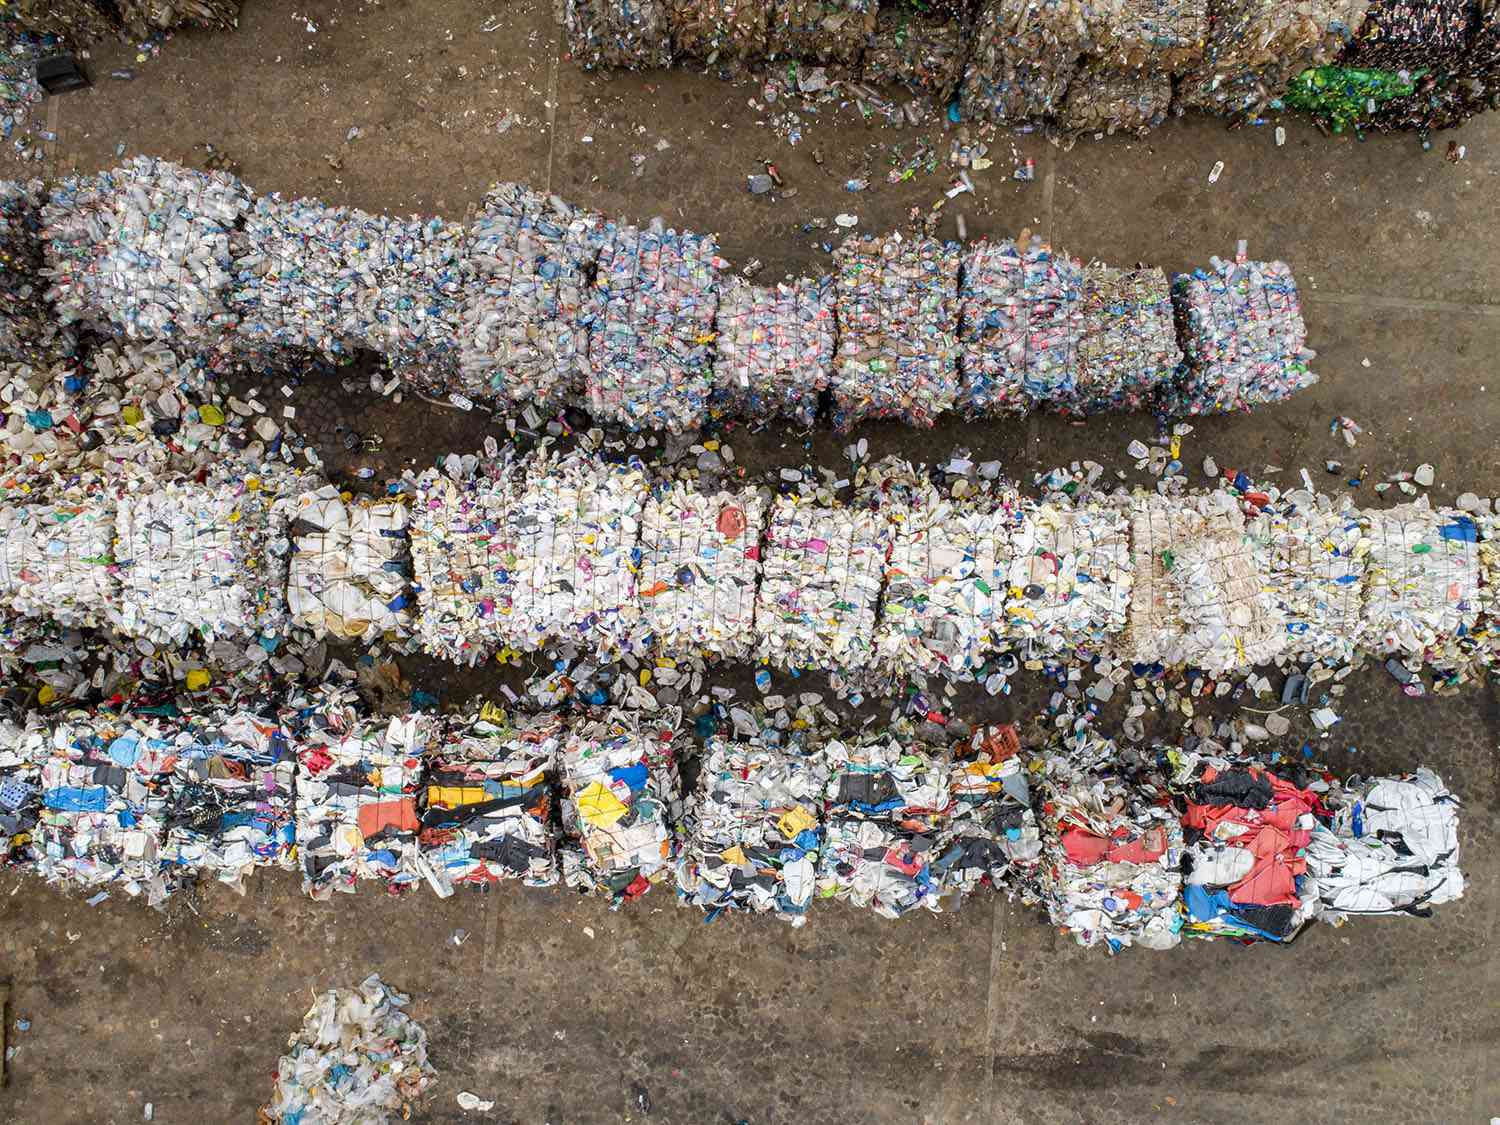 Straight down aerial view of compressed and tied up blocks of various plastic items and plastic bottles awaiting recycling at a recycling center